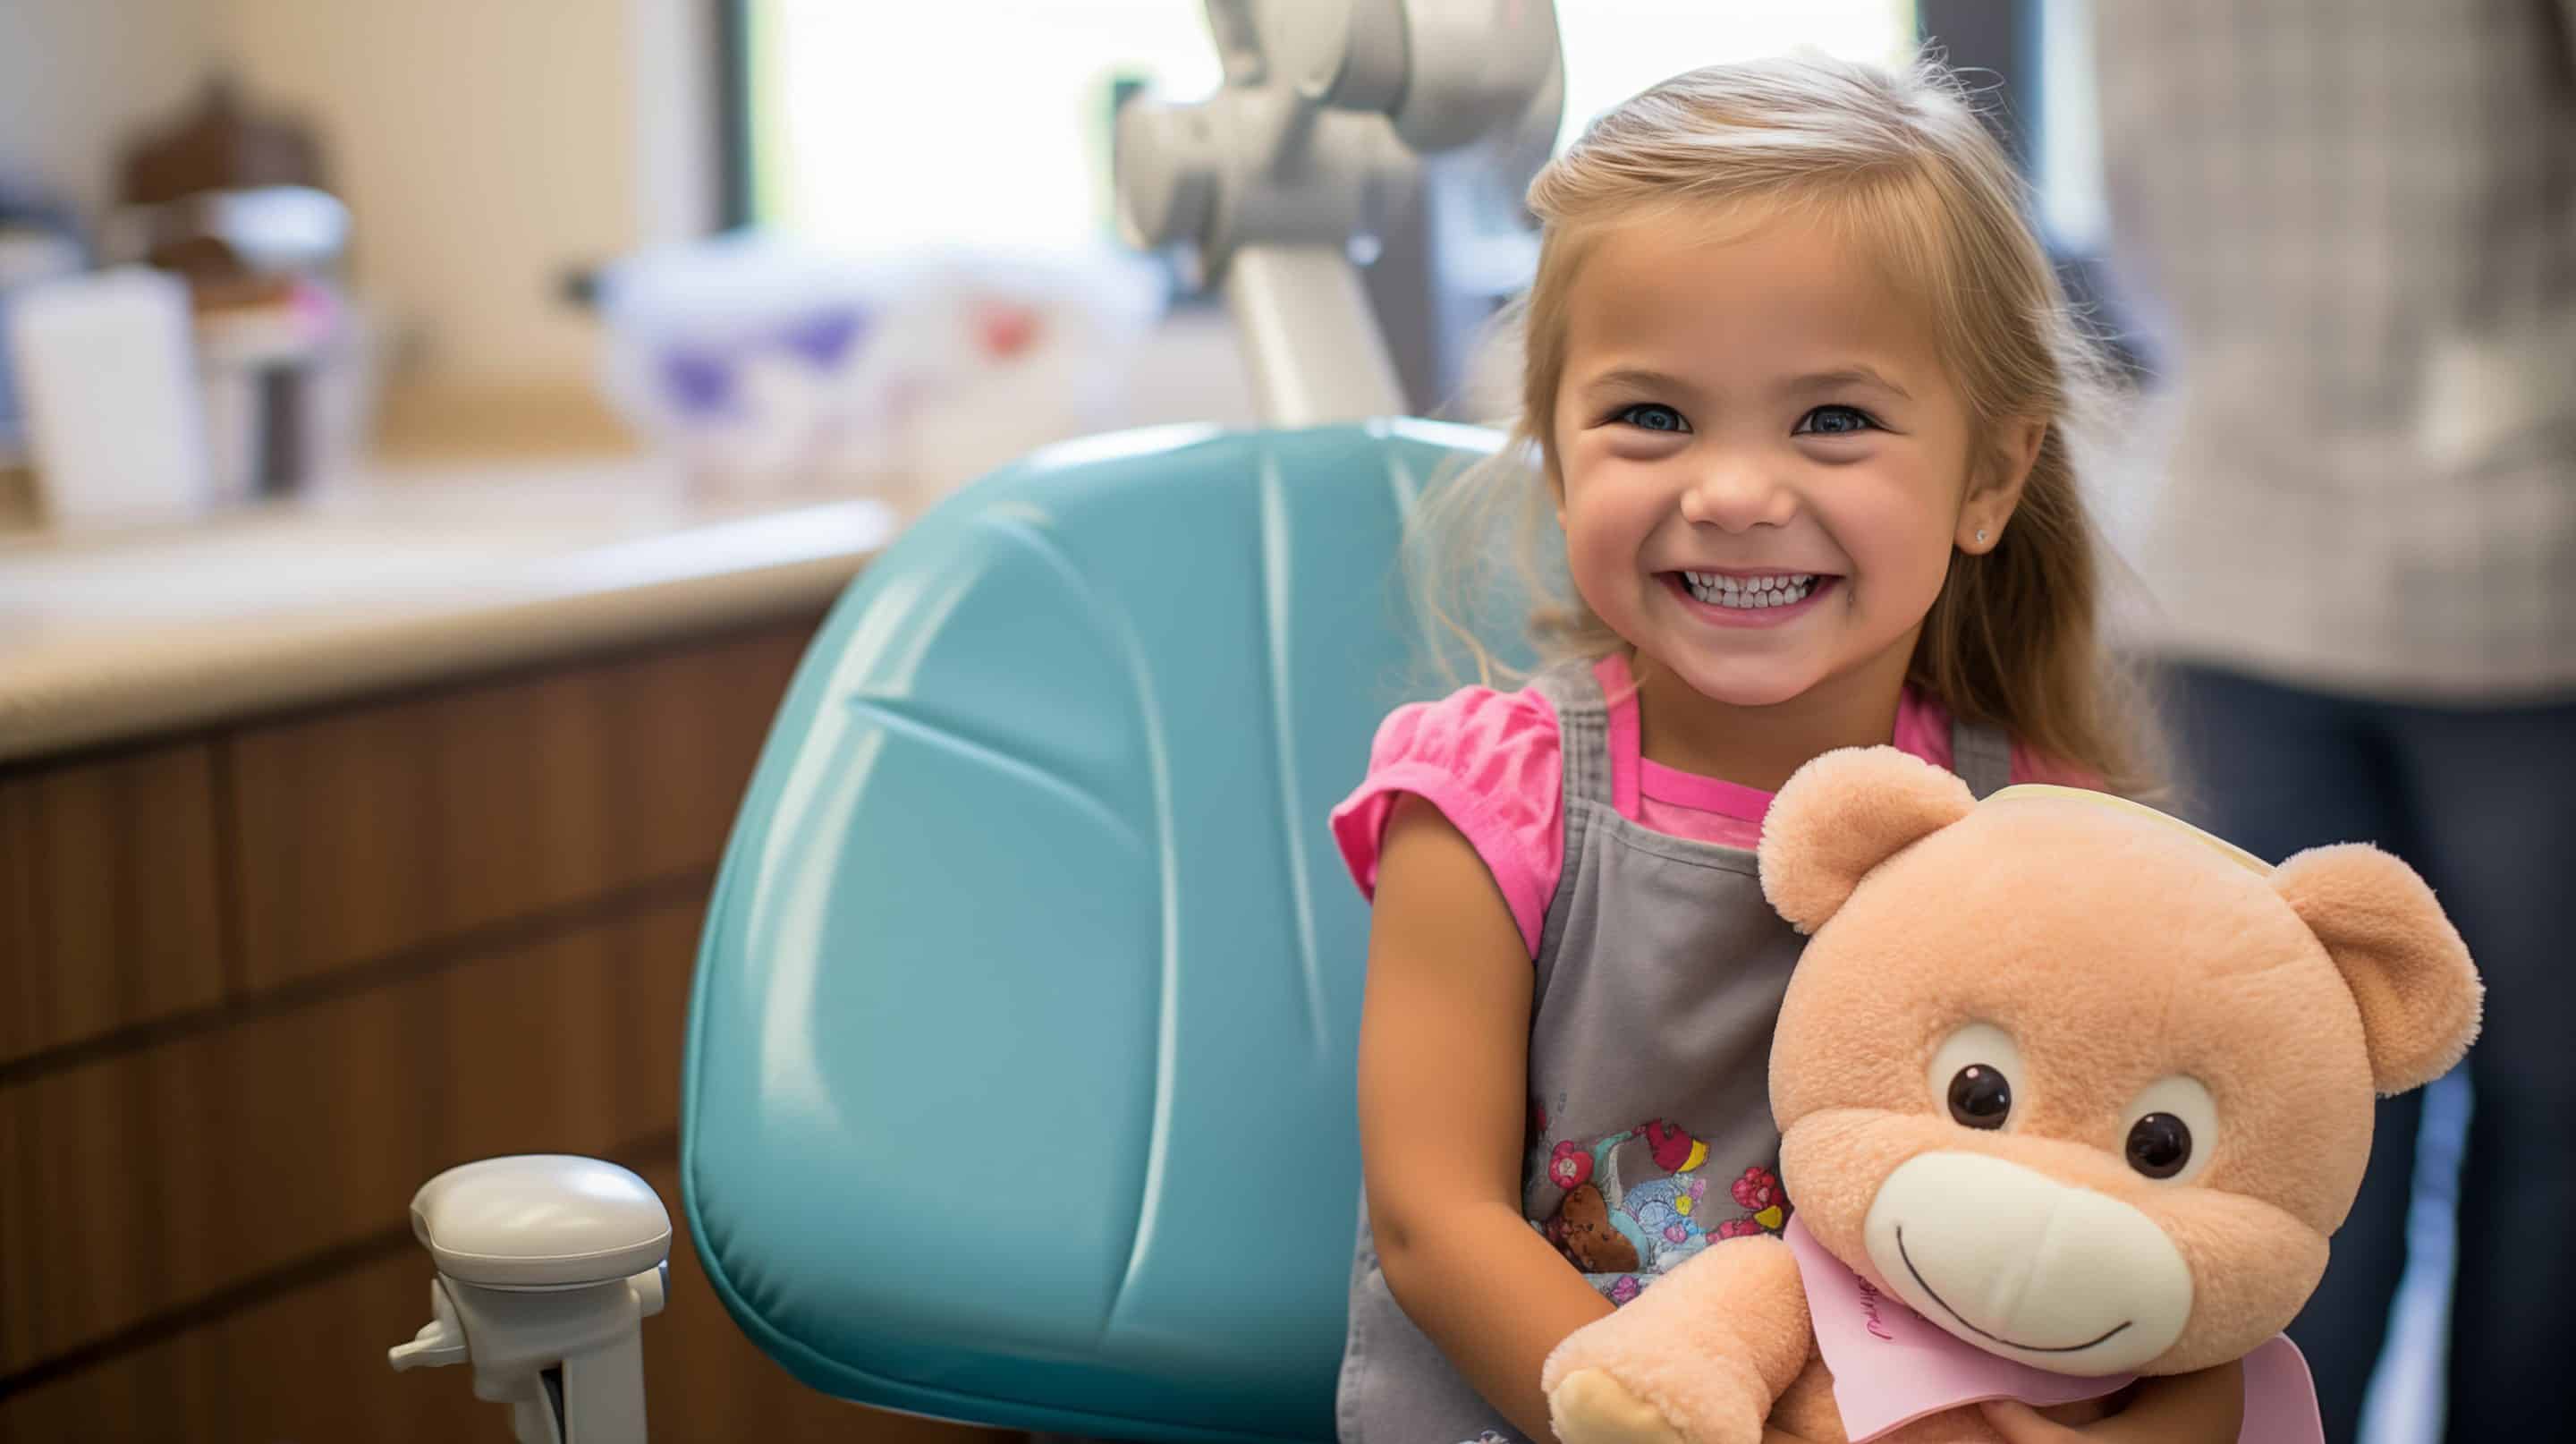 young girl sitting in dental chair smiling holding a bear - Pediatric Dentistry on Kimball